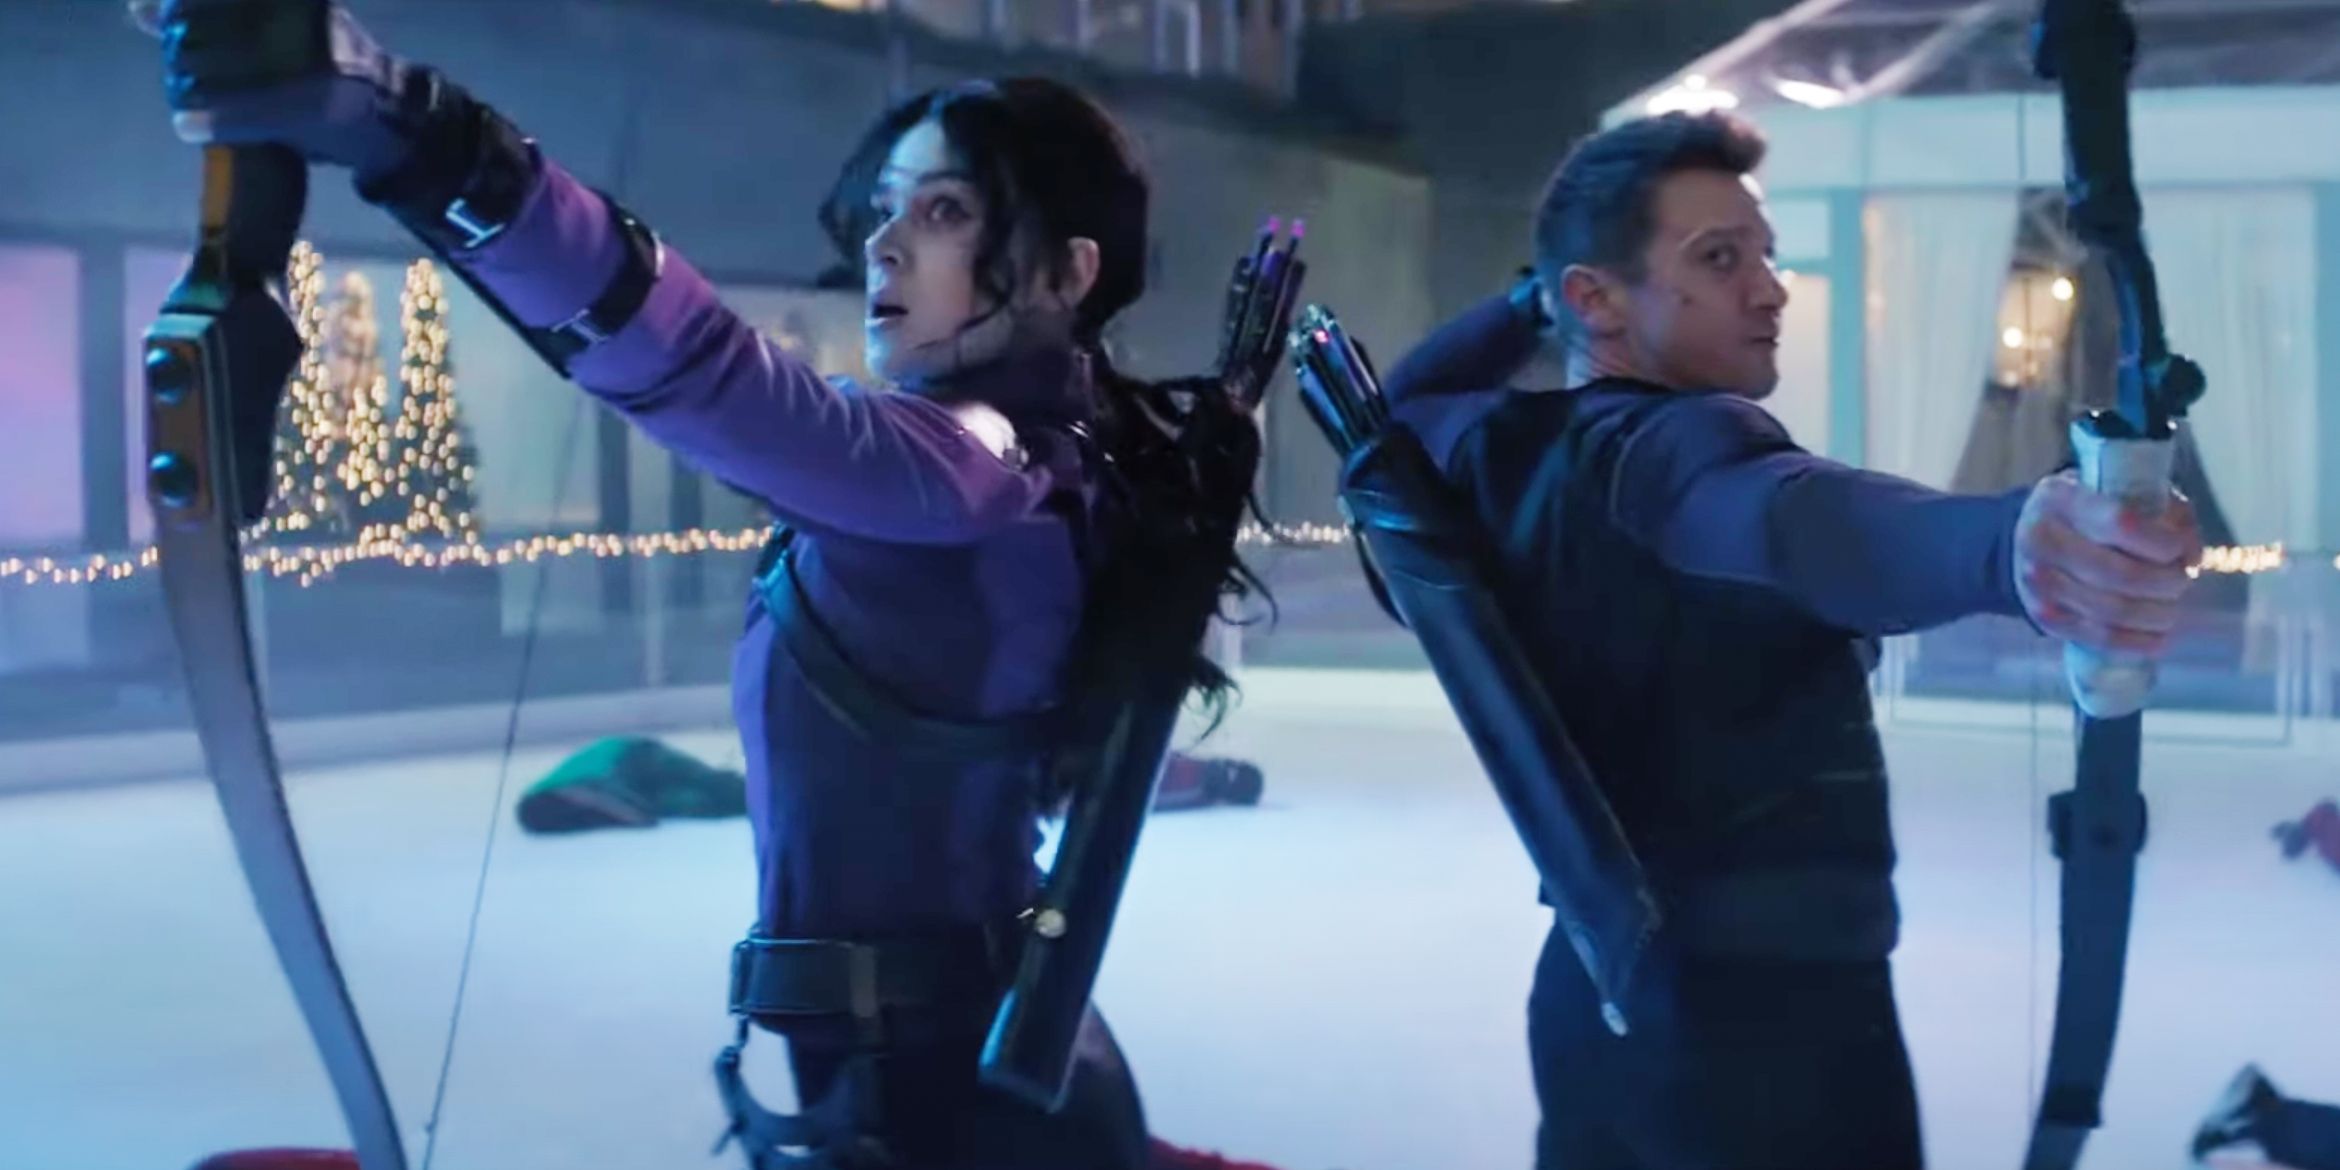 Kate and Clint about to fire their arrows in Hawkeye